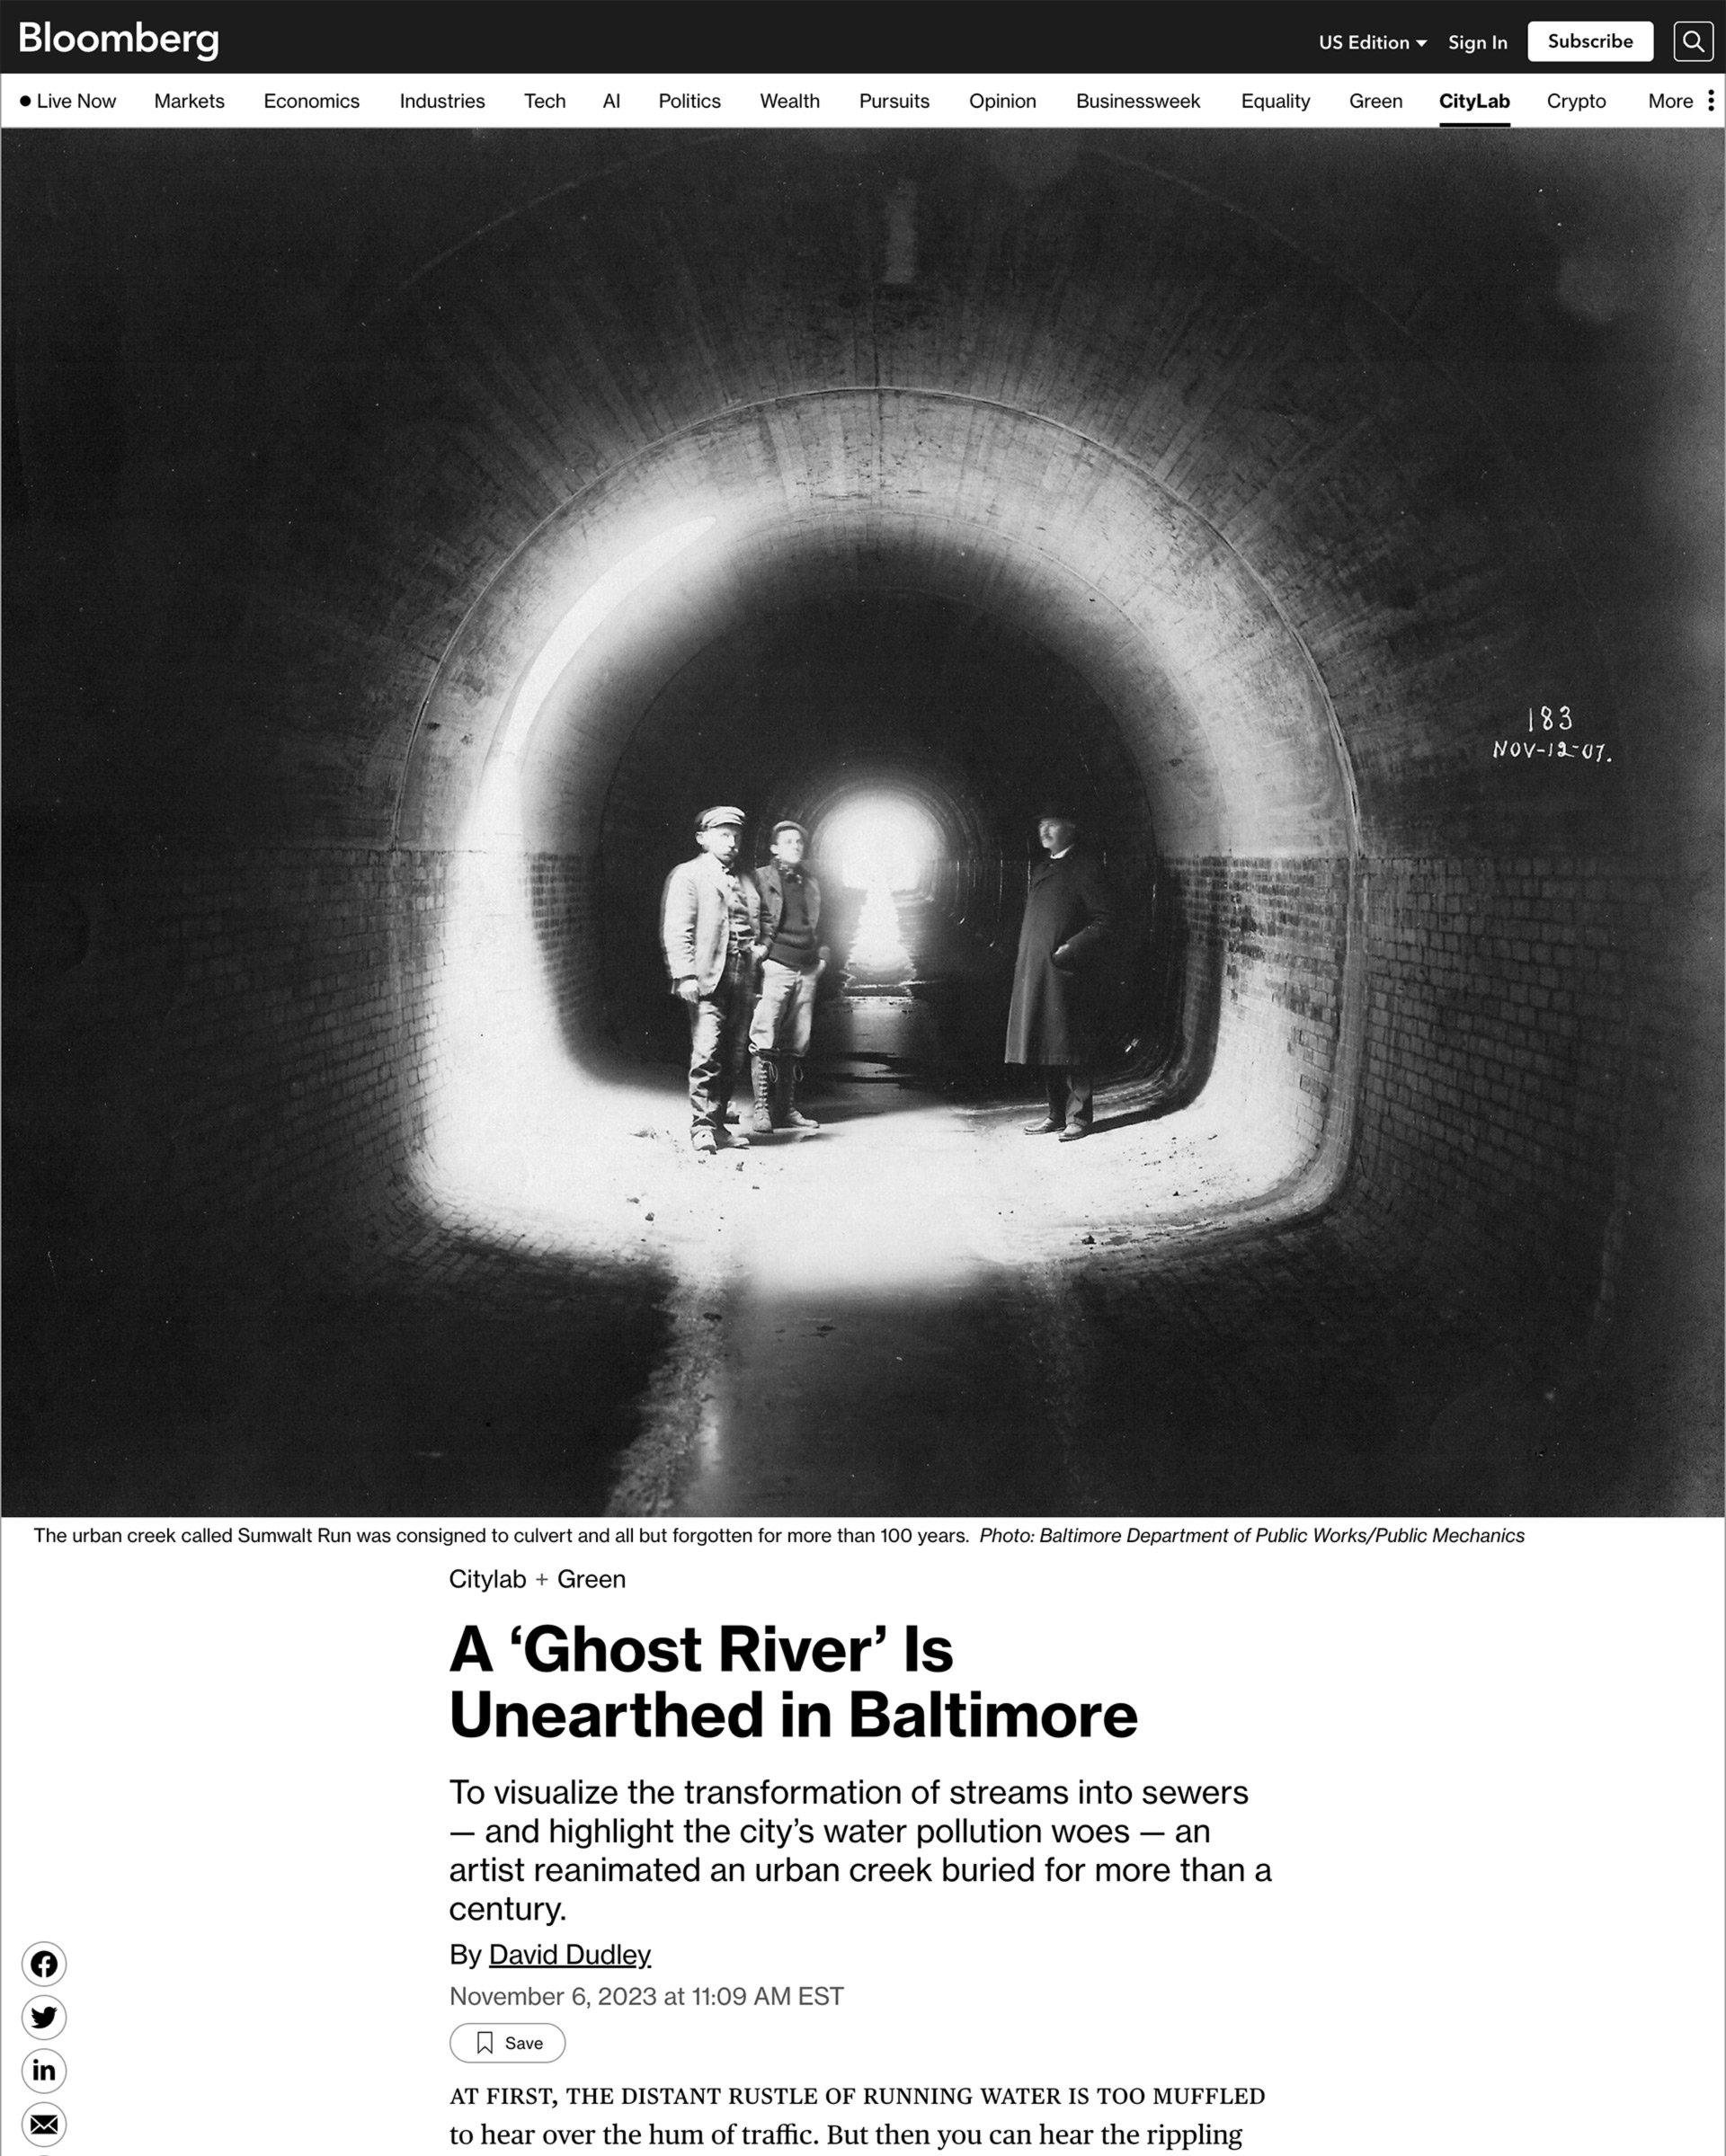 Bloomberg CityLab feature article on Ghost Rivers — A ‘Ghost River’ Is Unearthed in Baltimore